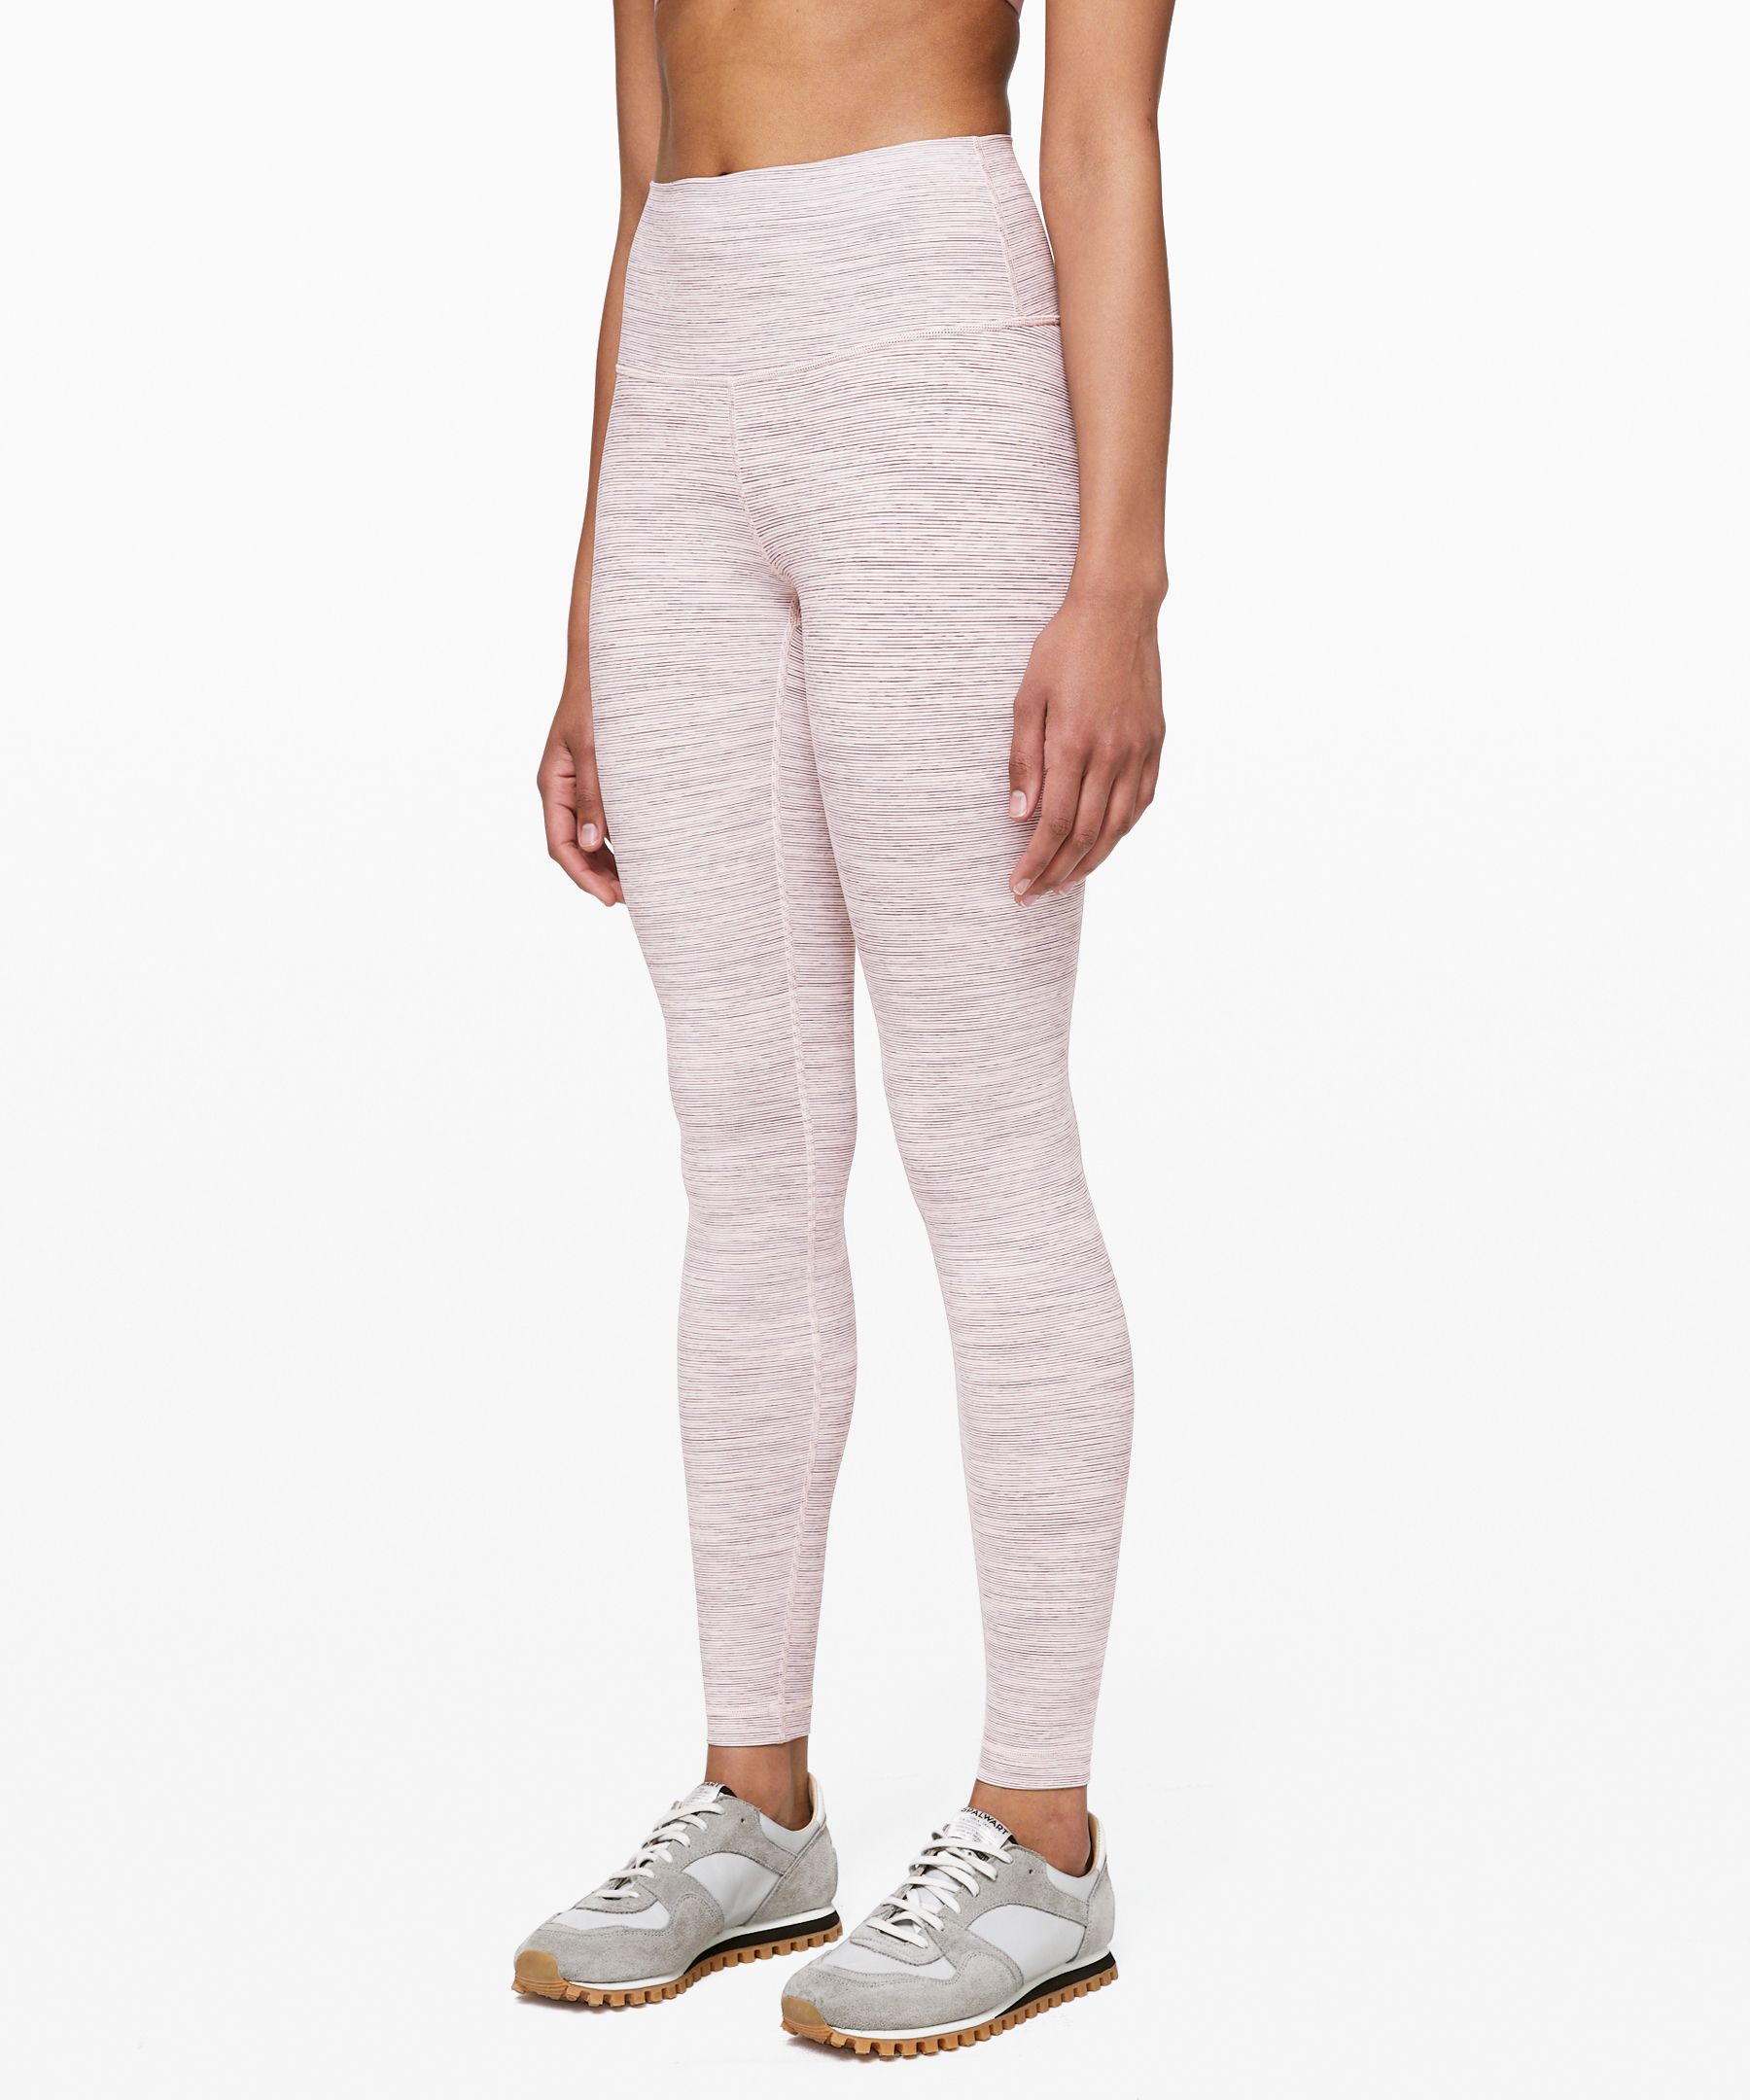 Lululemon Wunder Under High-rise Tight 28" *luxtreme In Wee Are From Space Pink Bliss Vintage